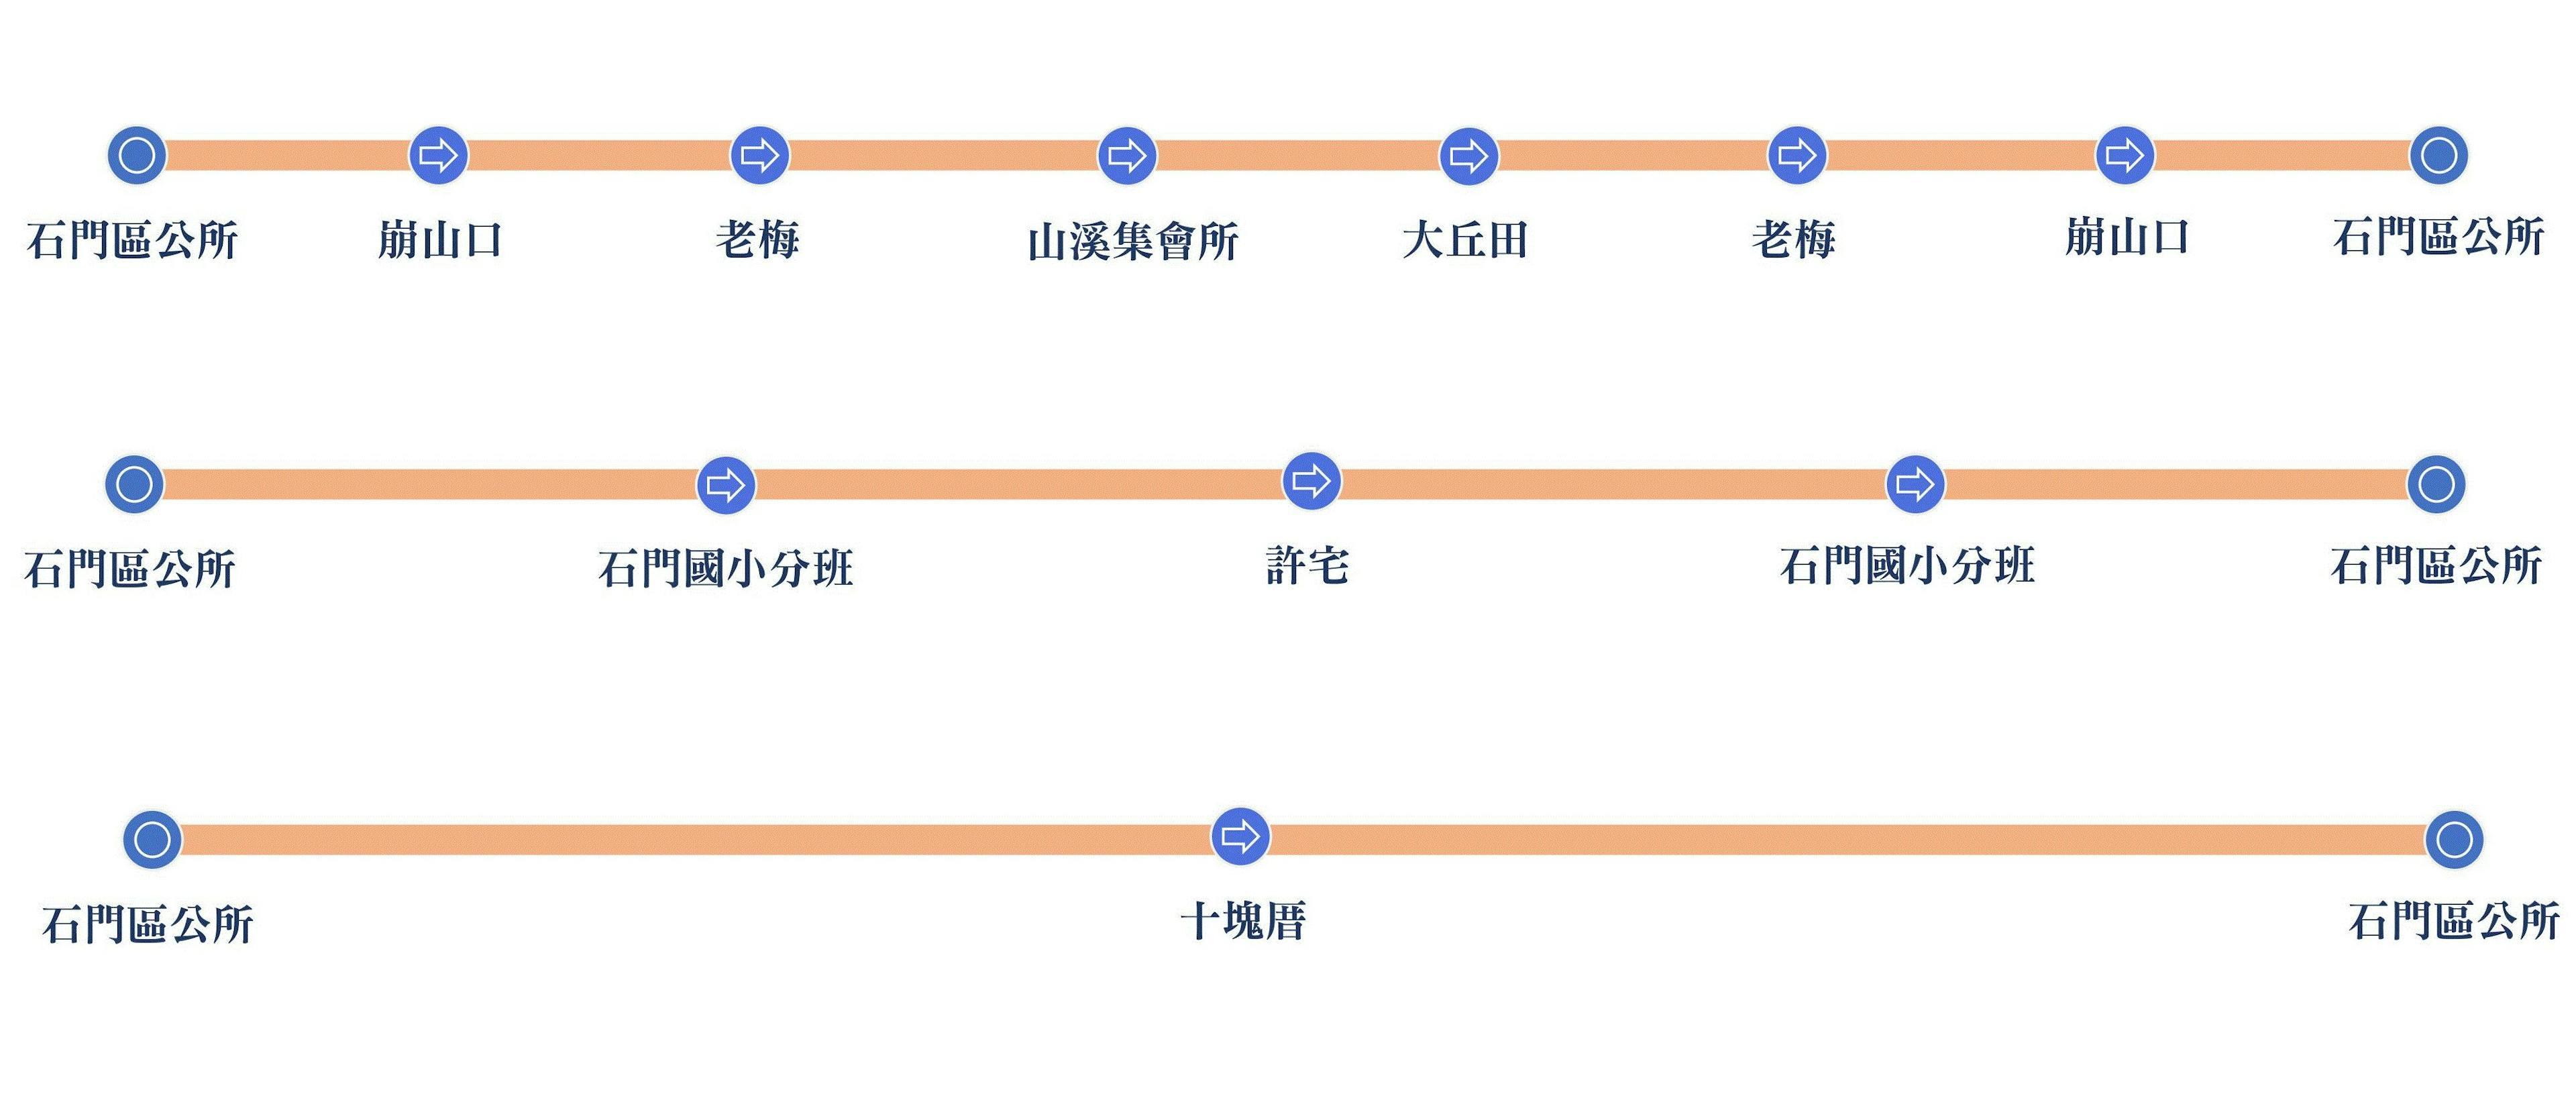 F151-0620Route Map-新北市 Bus